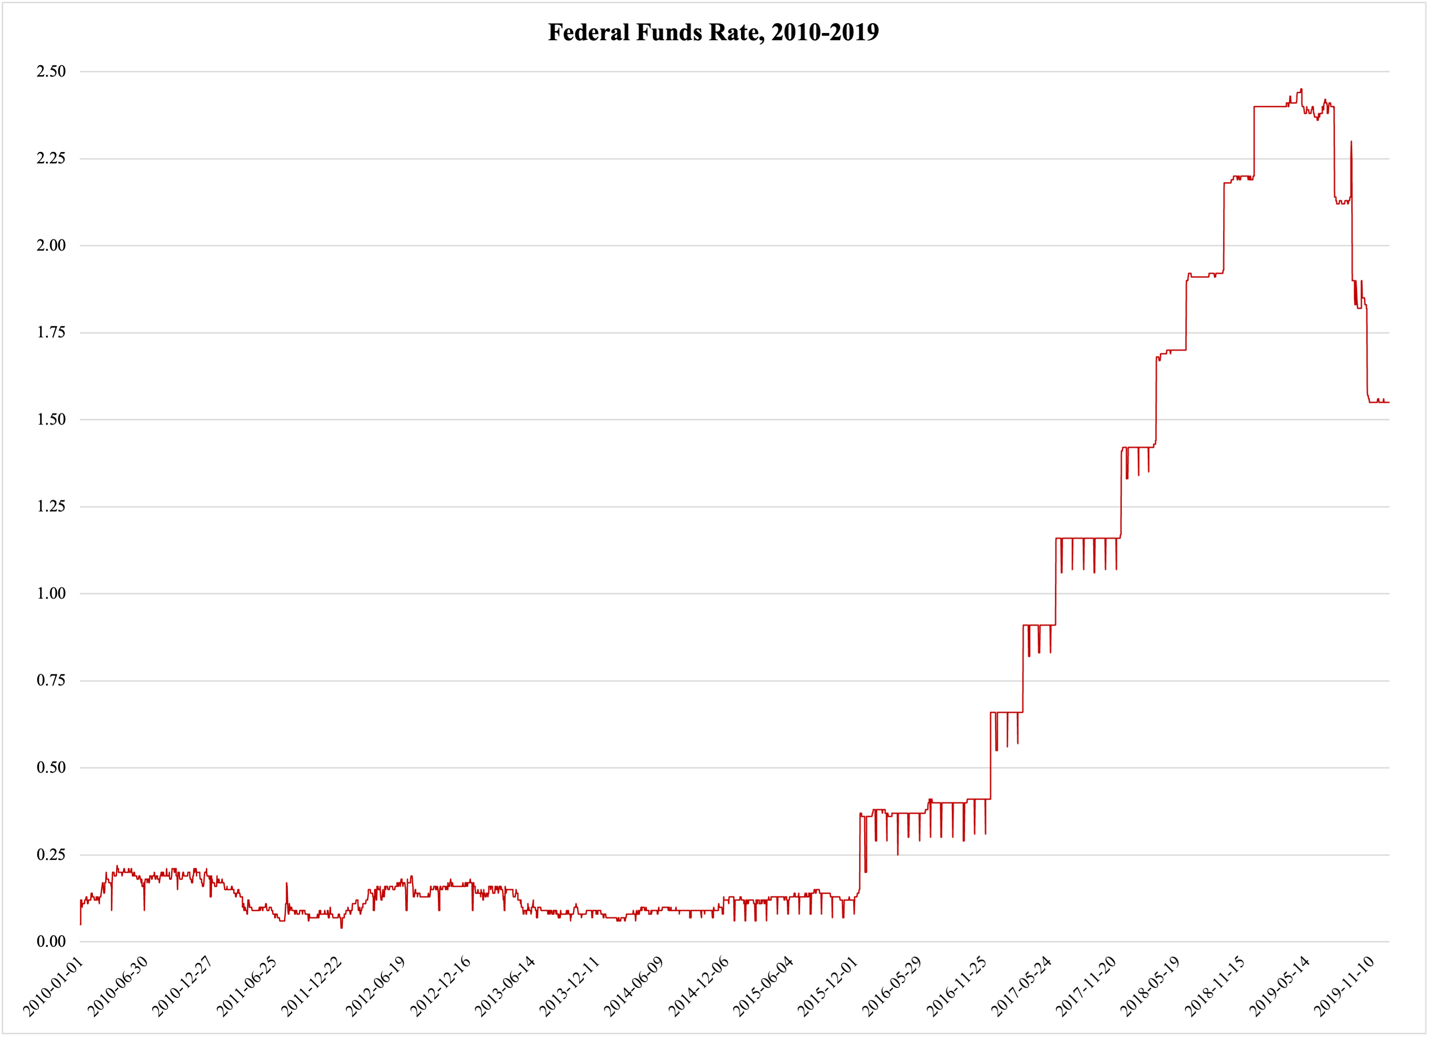 A graph showing the growth of the federal funds rate

Description automatically generated